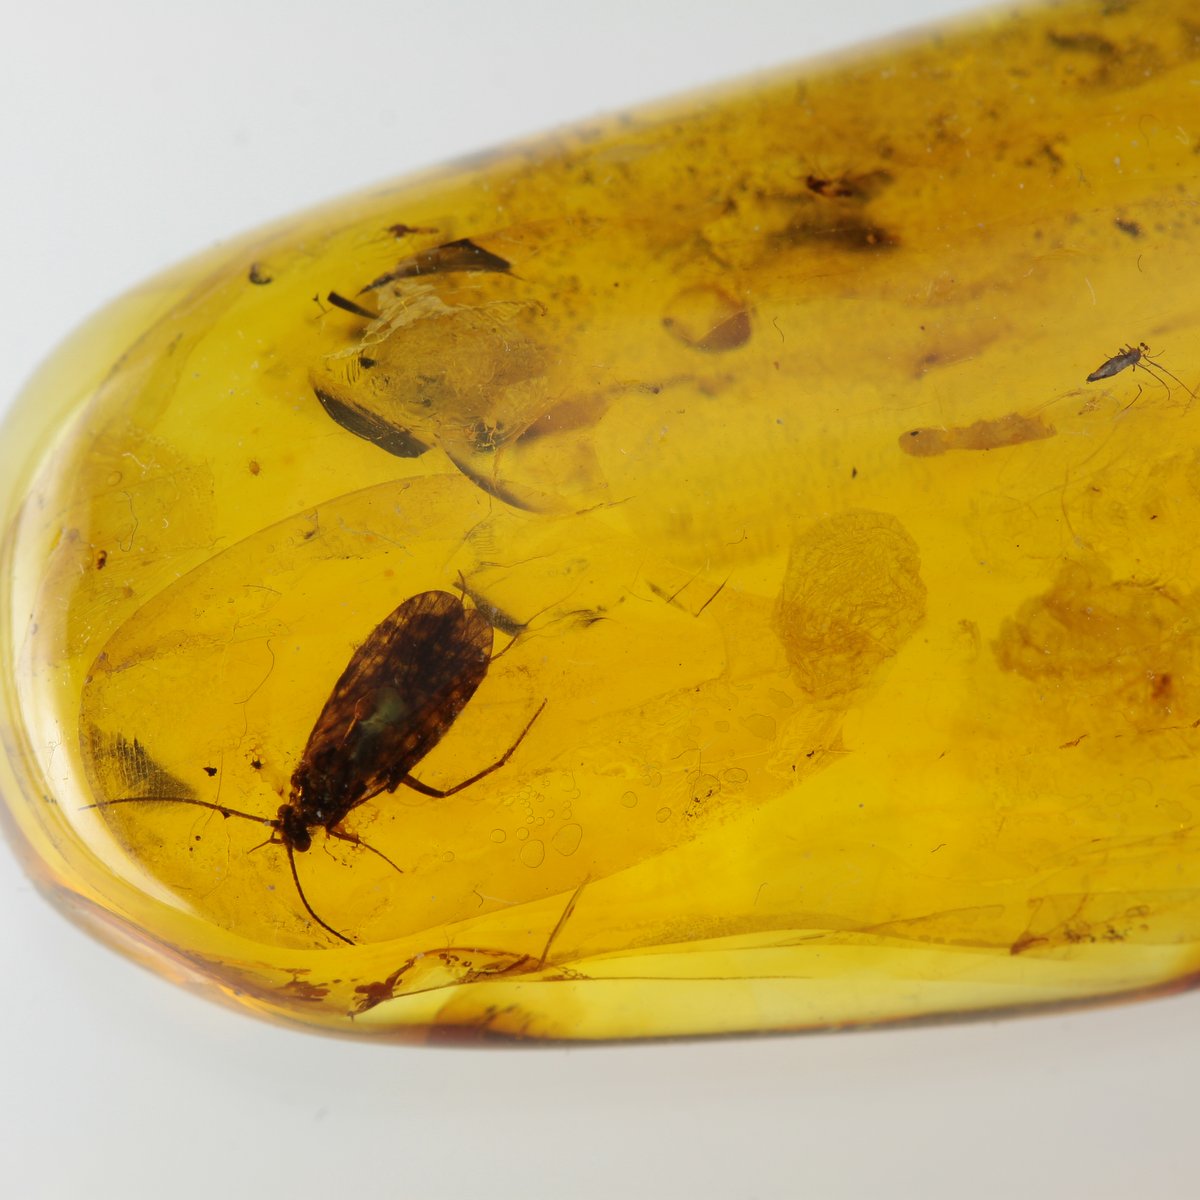 Genuine Baltic Amber With Insect Inclusion